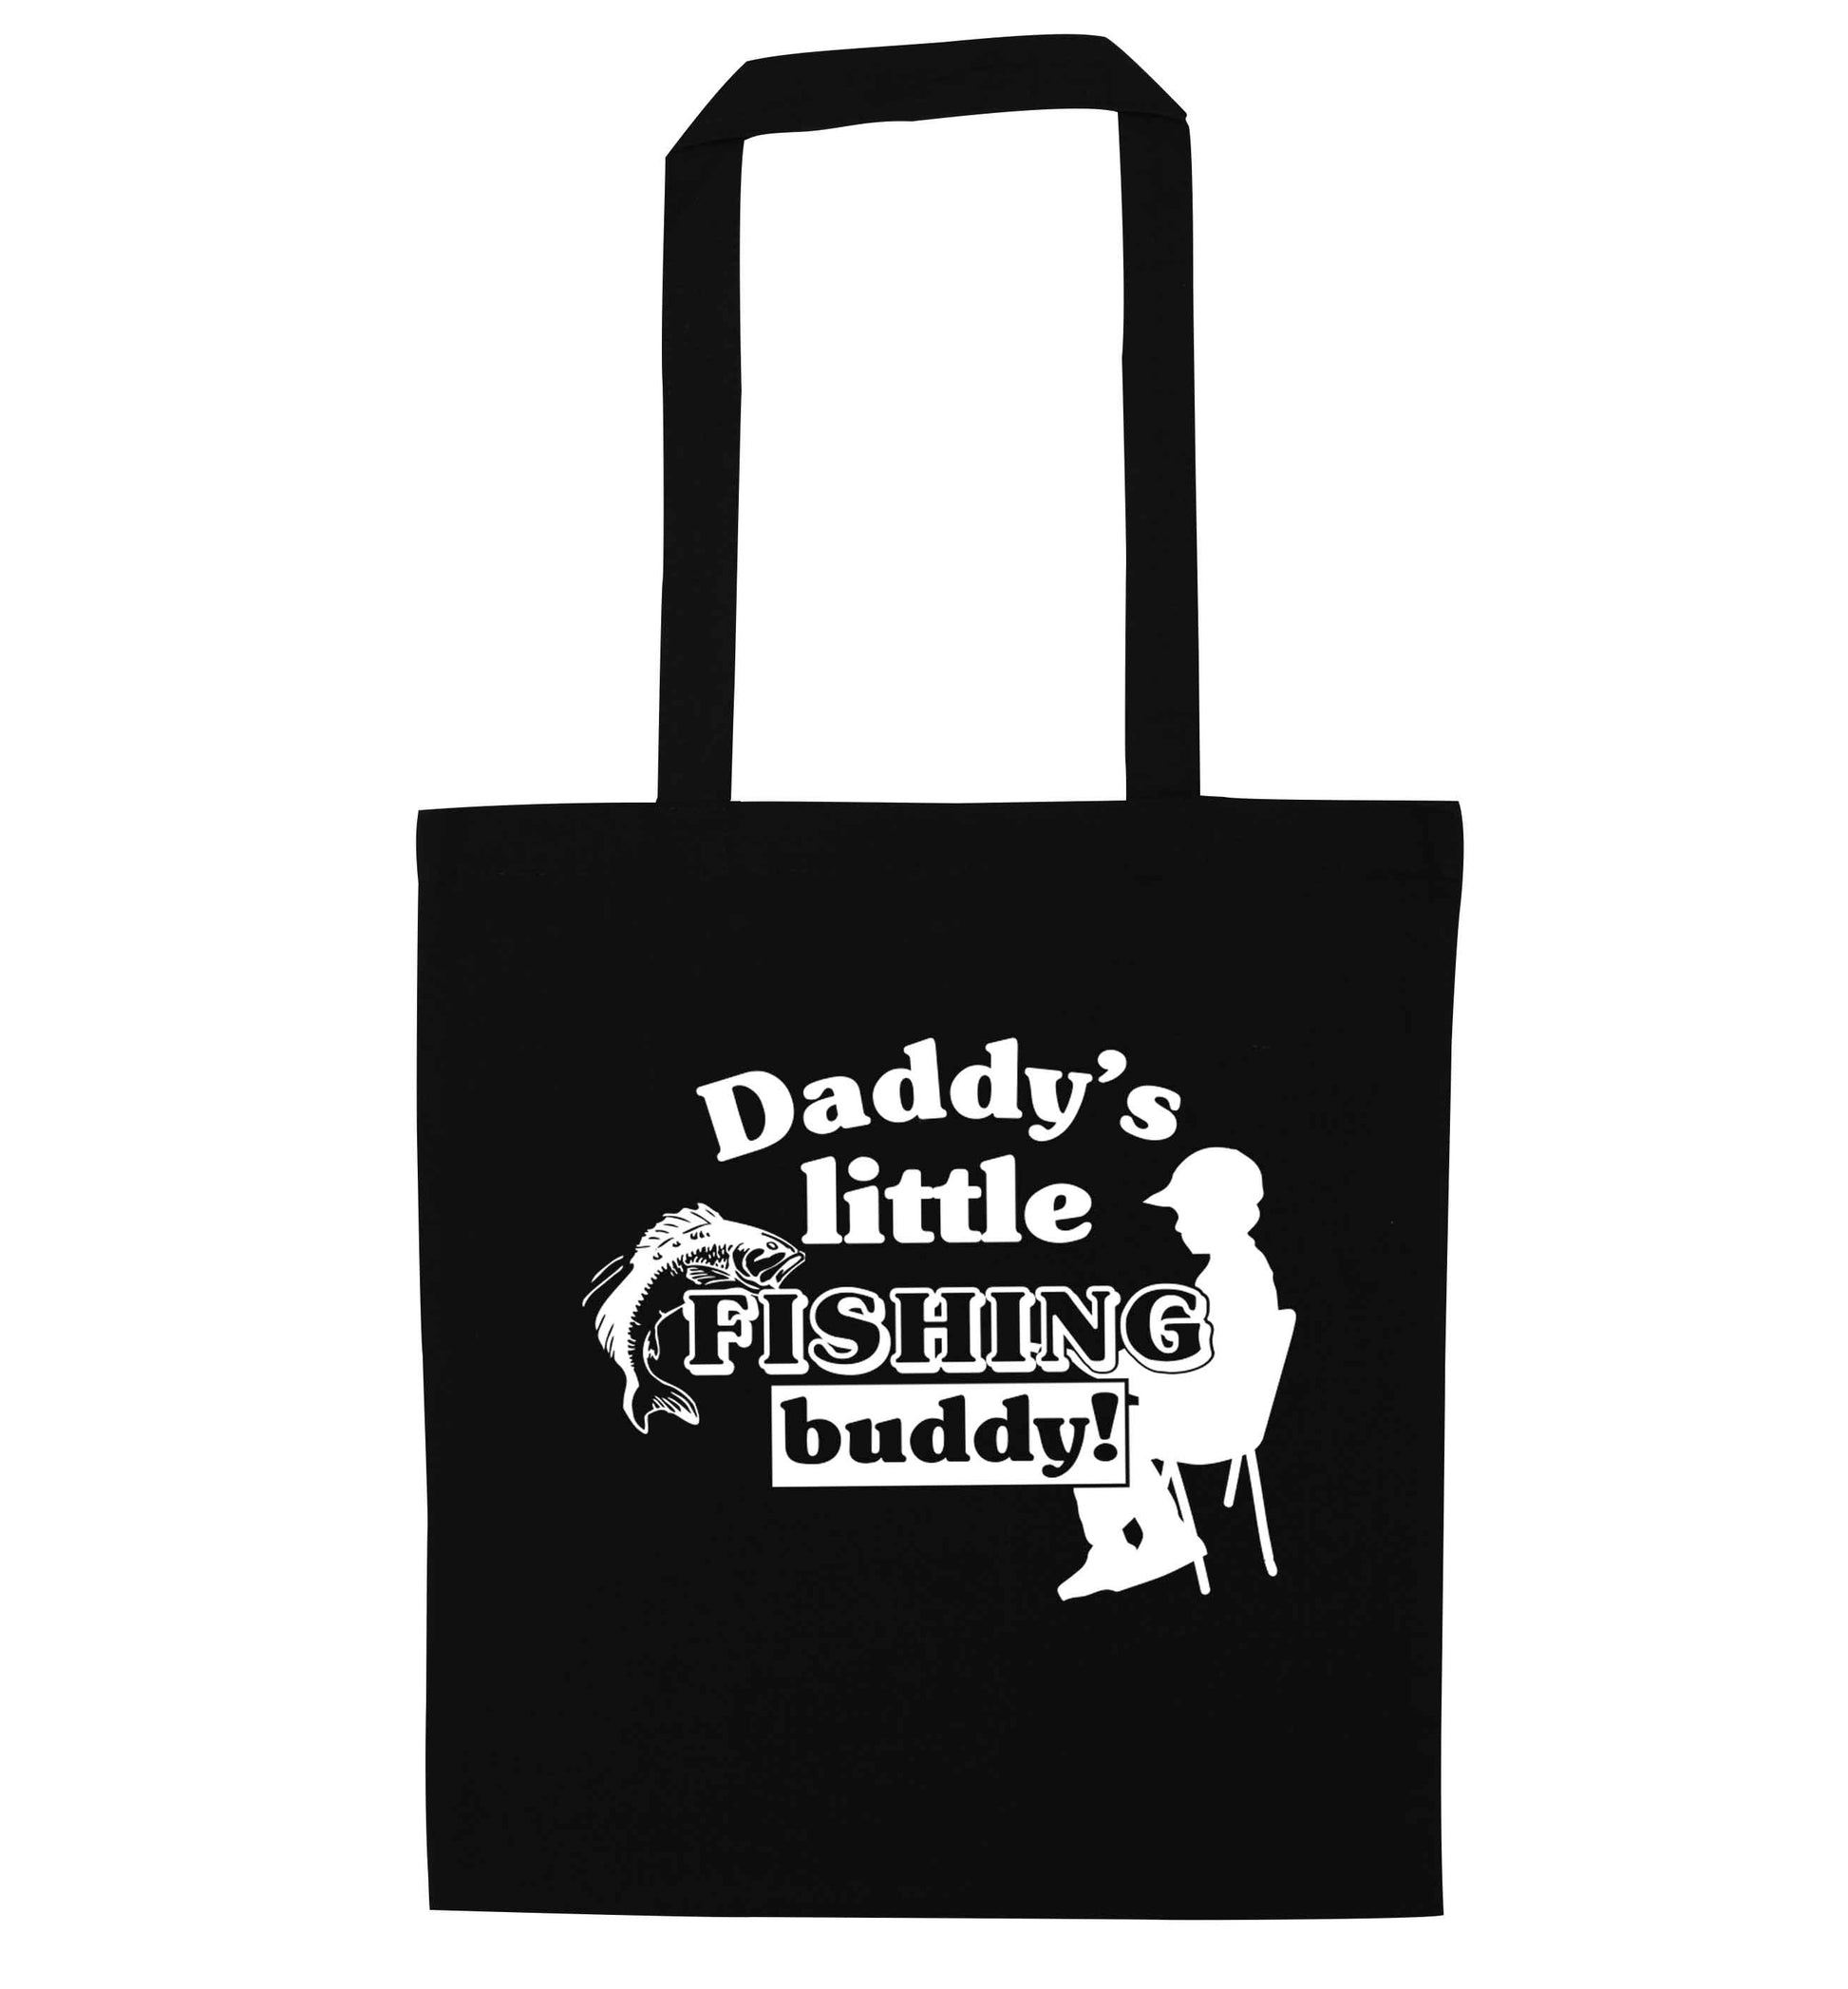 Daddy's little fishing buddy black tote bag